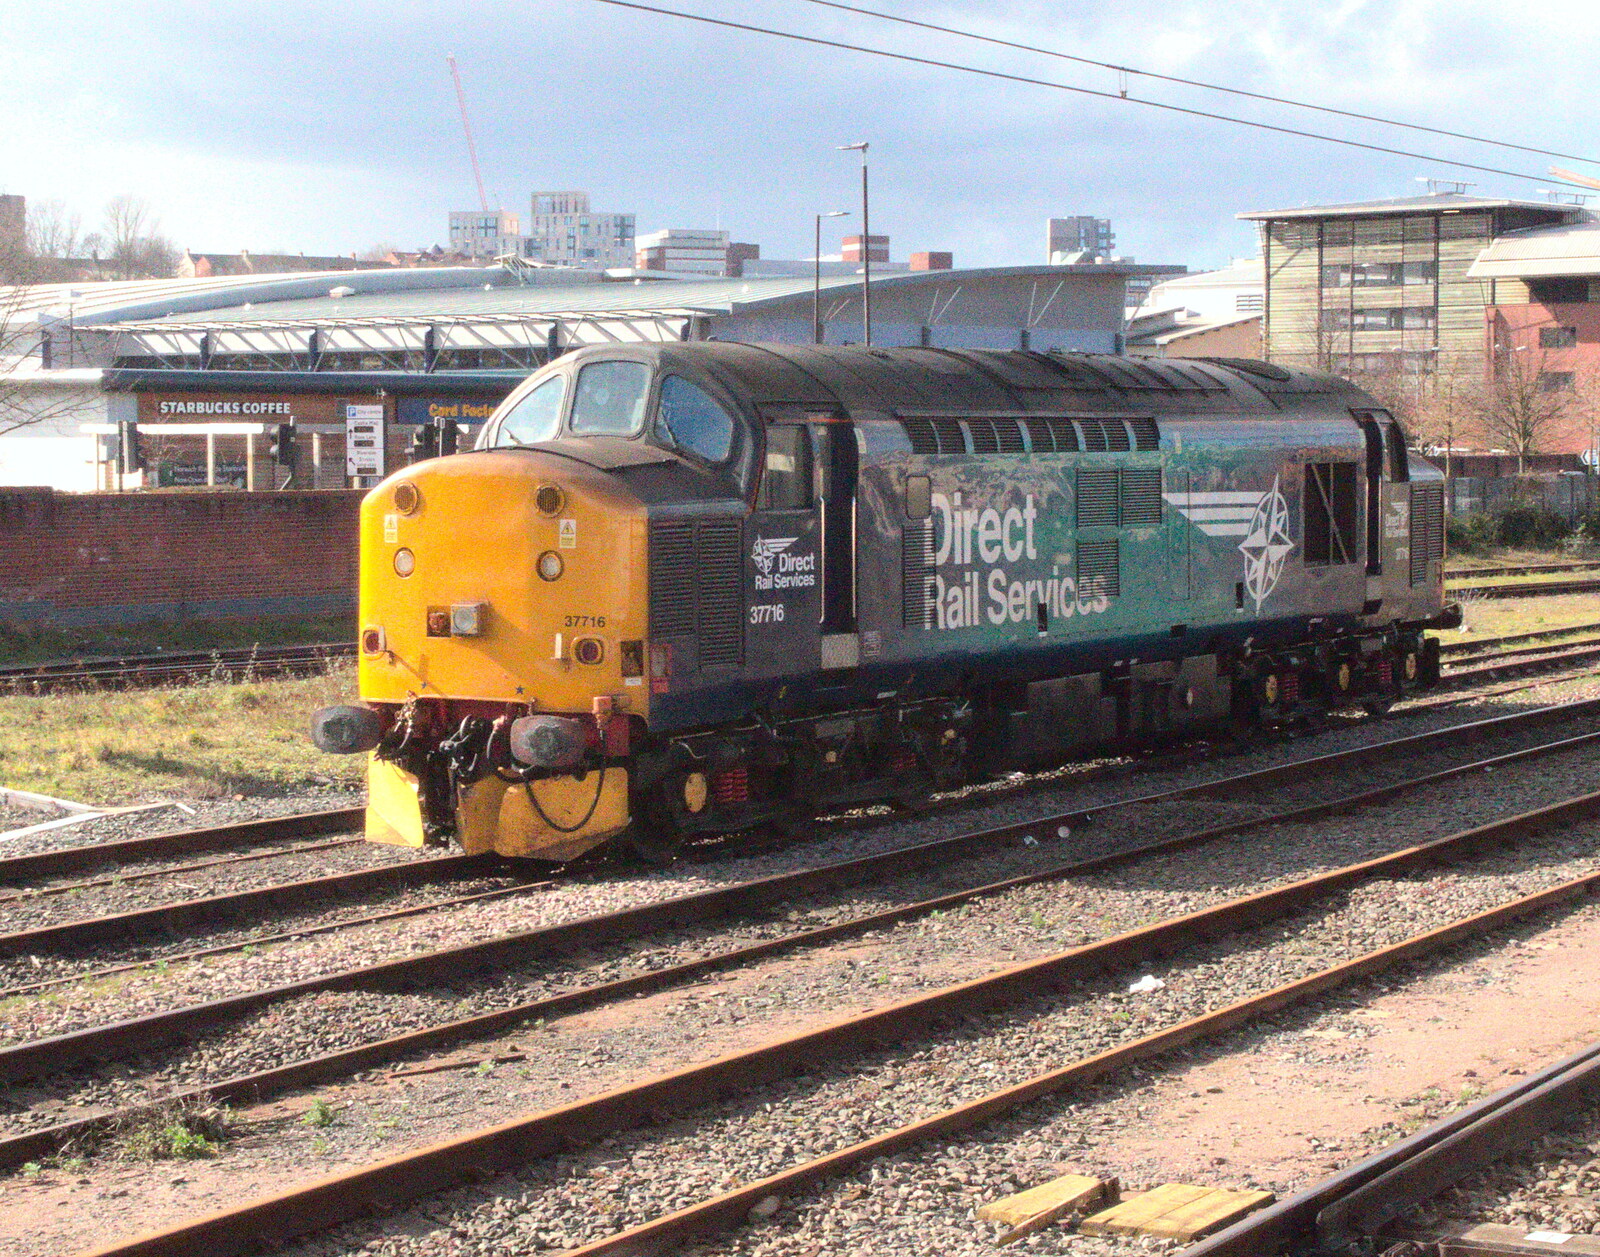 An ancient Class 37 loco - 37716 - at Norwich from Off to the Cinema Again, Norwich, Norfolk - 9th March 2019